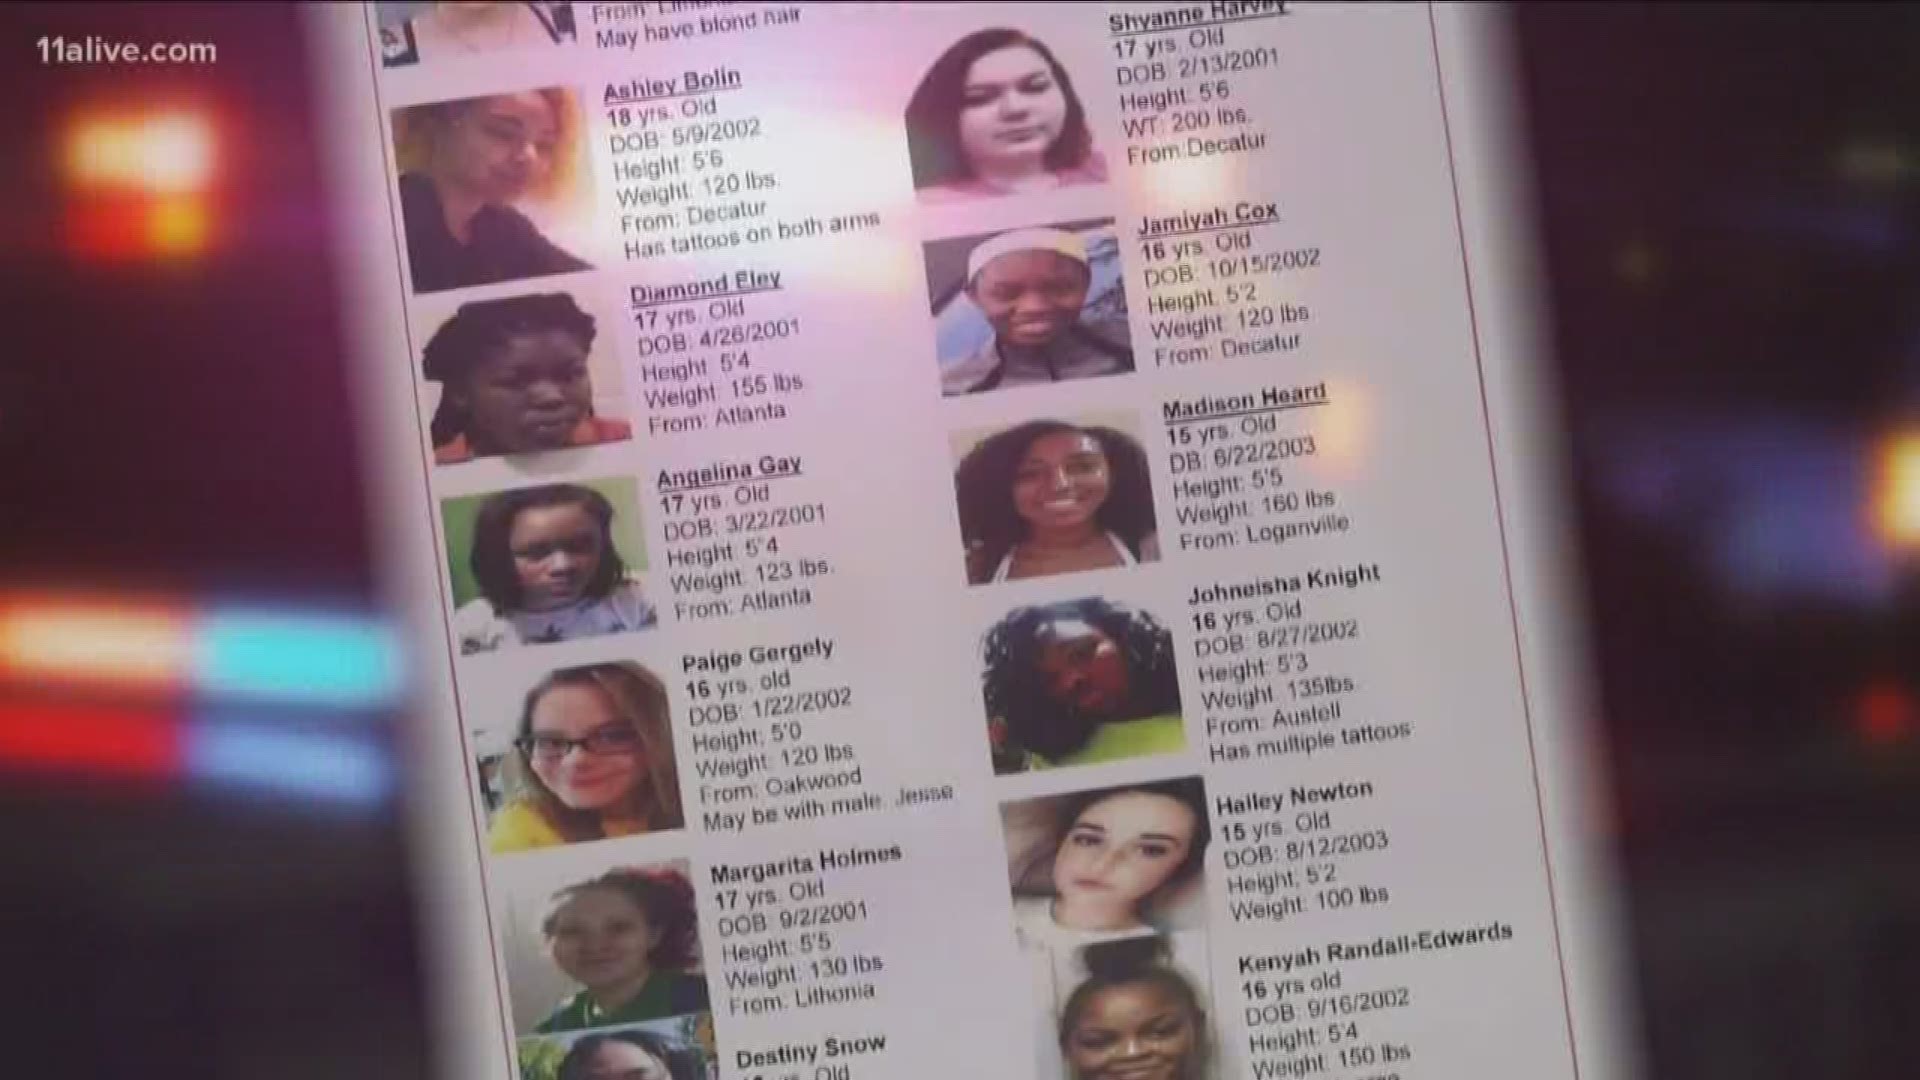 Several groups are hoping to bring attention to child sex trafficking in Georgia and is putting out a list, hoping to get them home before such a disturbing fate materializes for them.